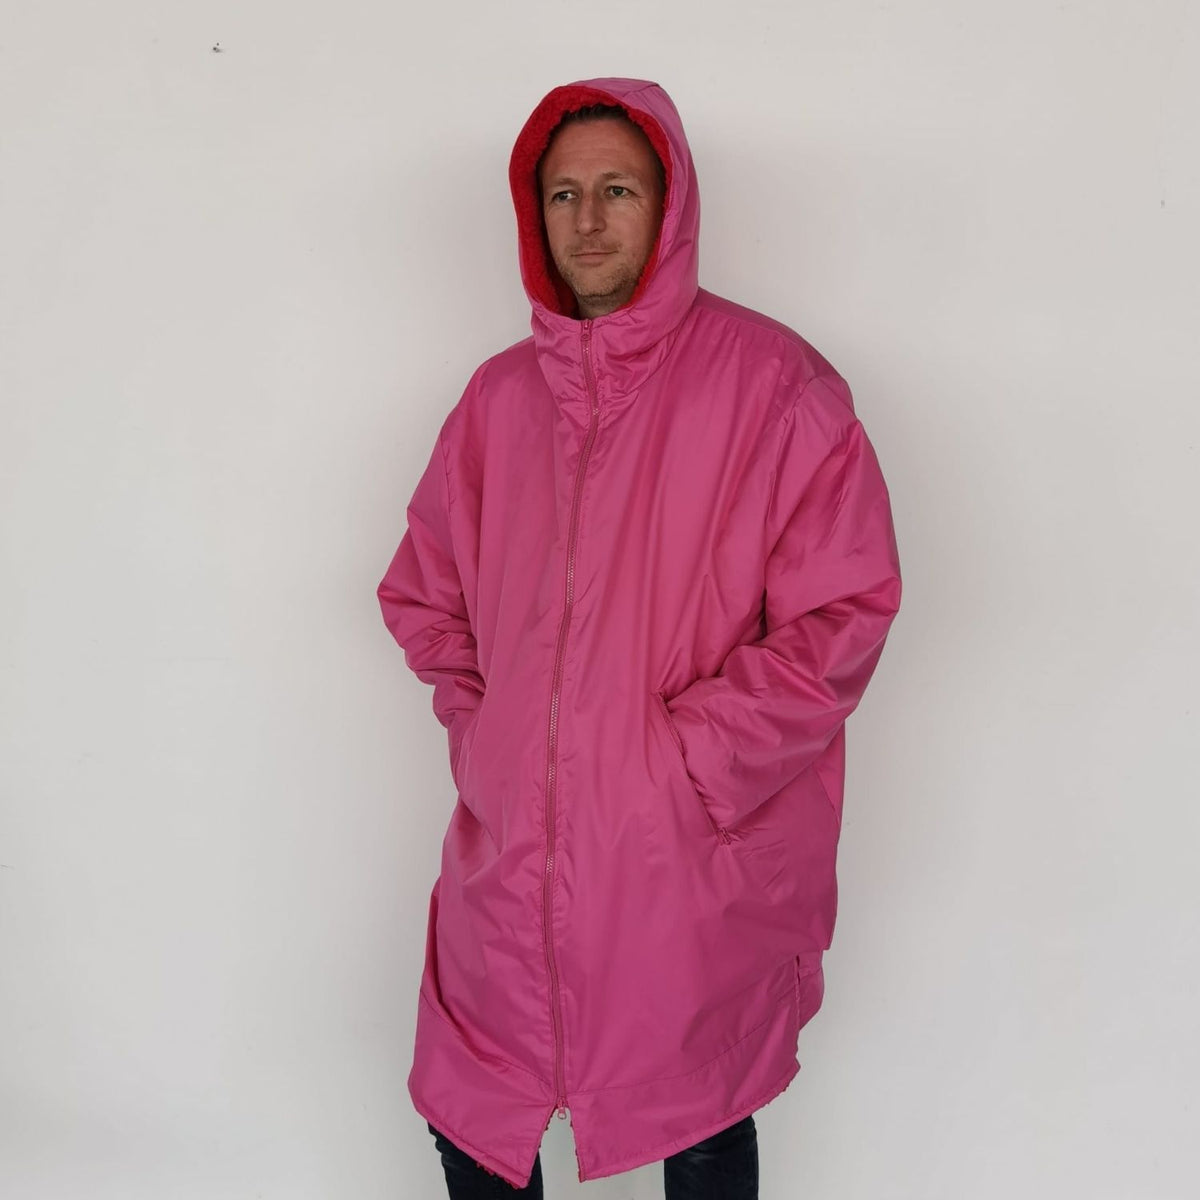 Dry Robe - Pink / Red